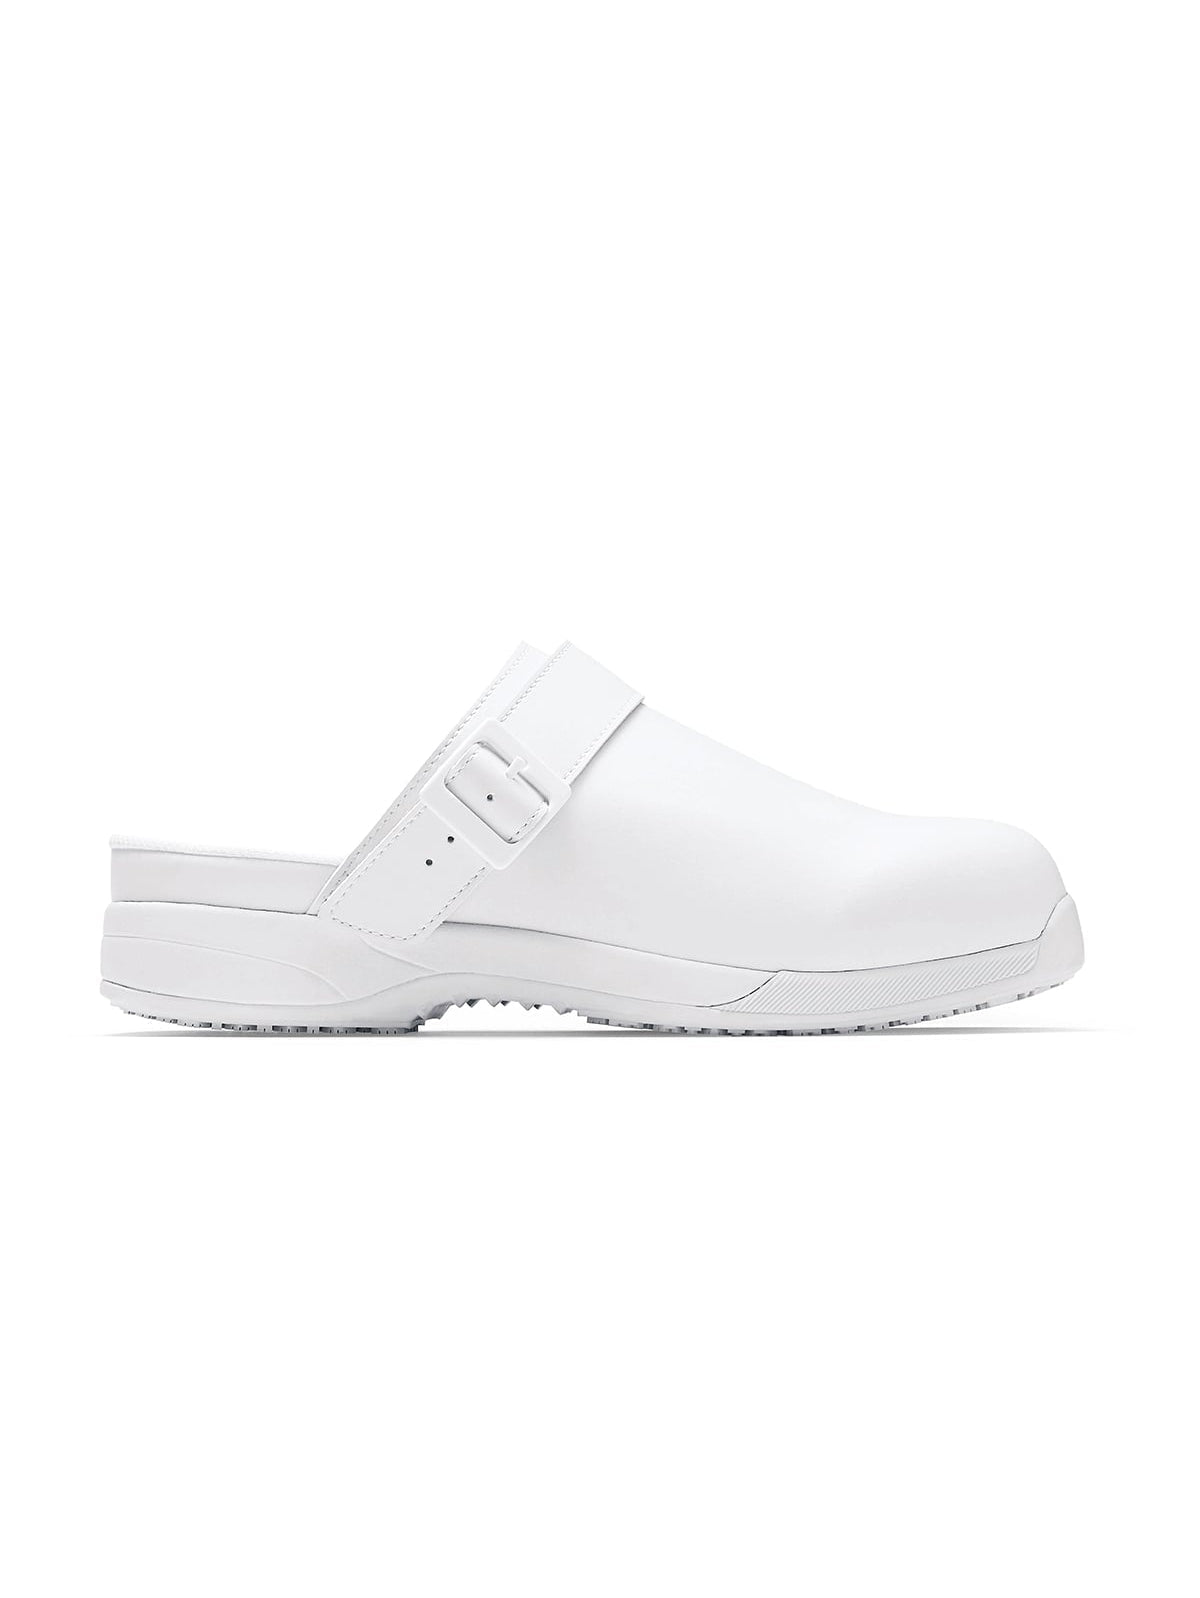 Unisex Work Shoe Triston II SB White by Shoes For Crews -  ChefsCotton